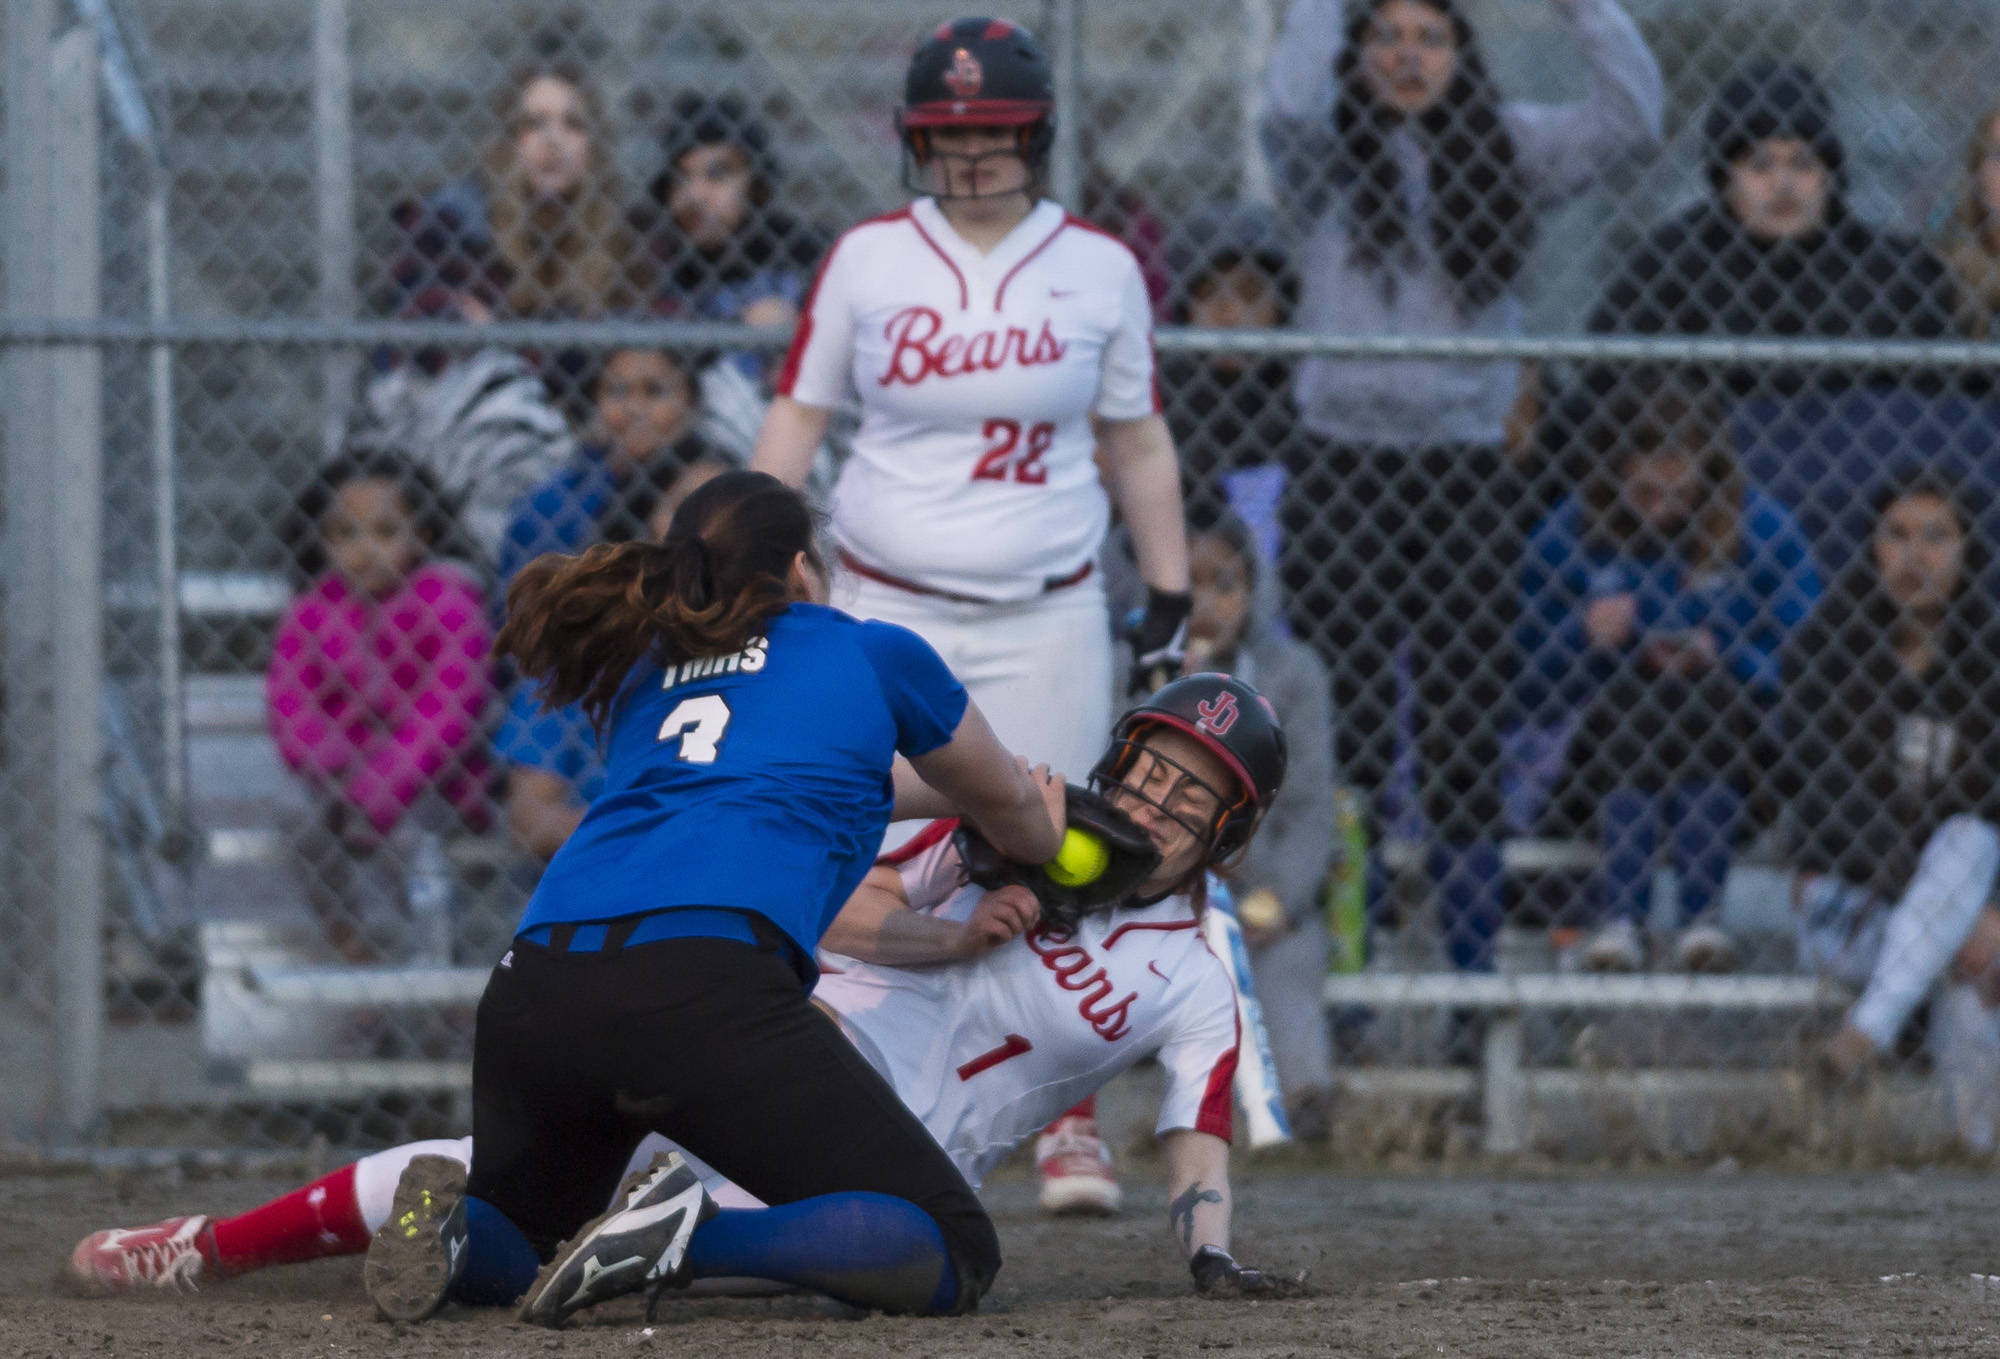 Thunder Mountain’s Nina Fenumiai, right, tags out Juneau-Douglas’ Elisa Fabrello trying to steal home on a passed ball at Dimond Park on Friday. TMHS won 11-4. (Michael Penn | Juneau Empire)